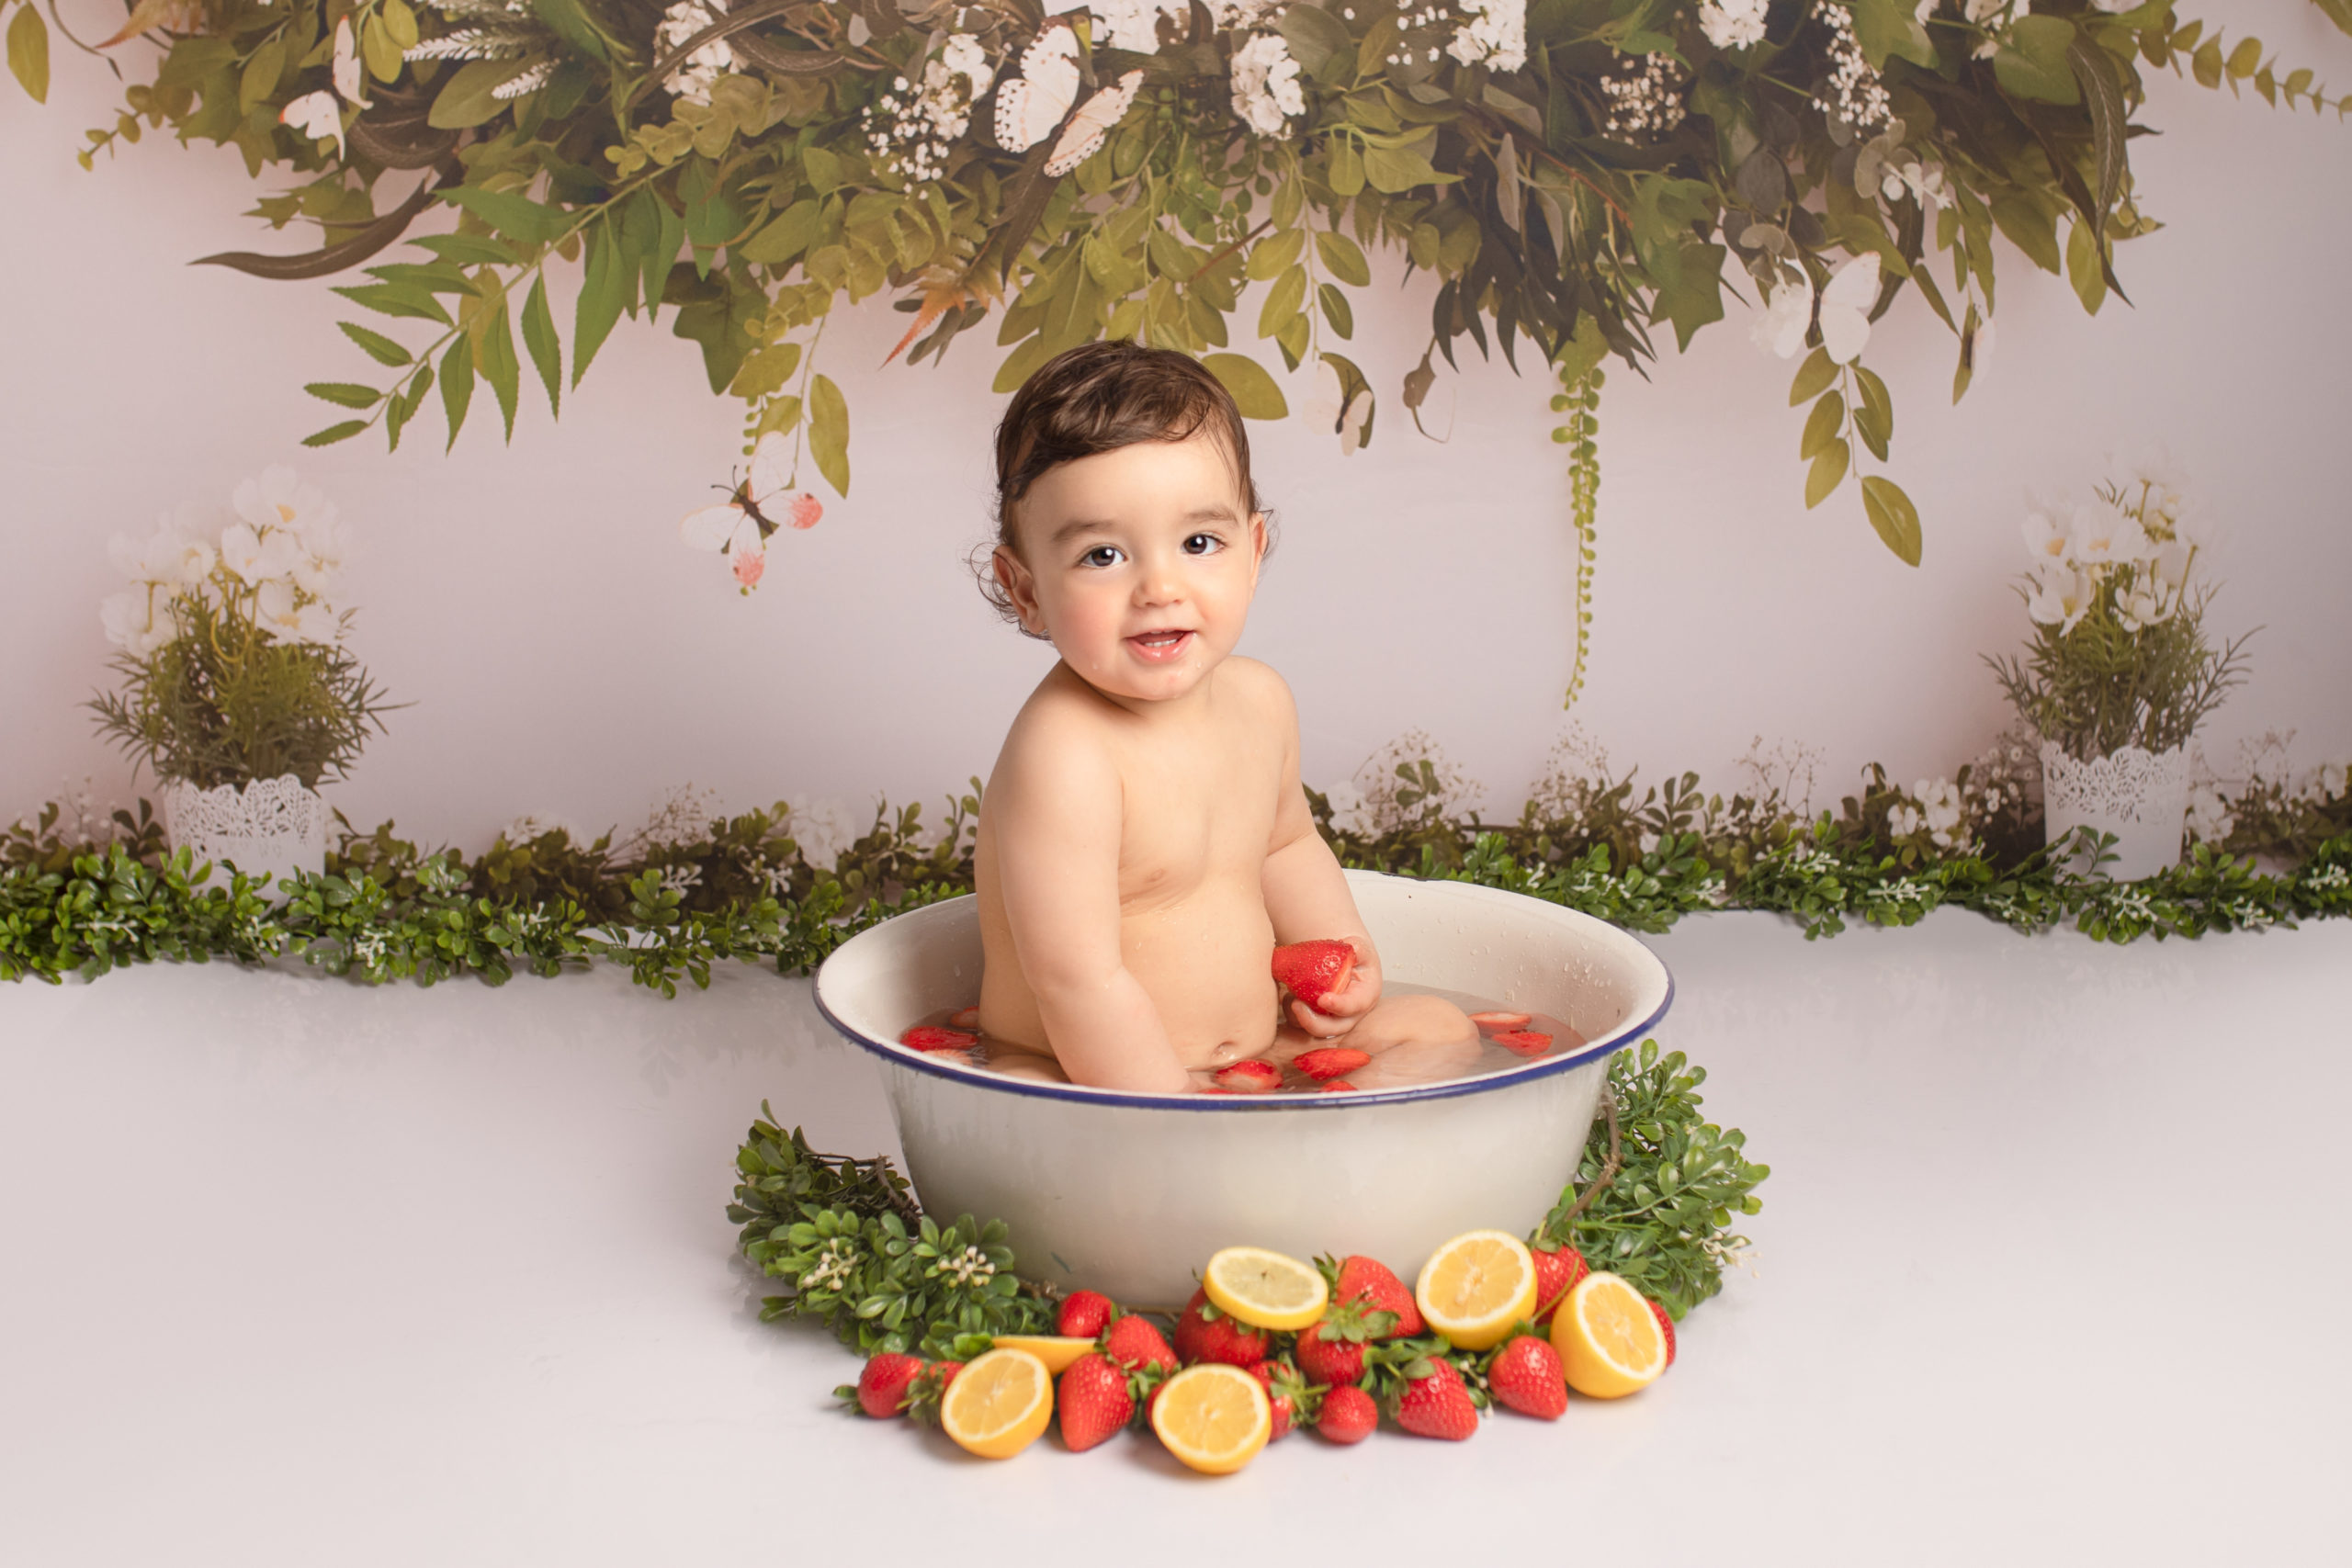 Fruit bath - Strood, First Birthday by Cake Smash Photographer in Medway, Kent